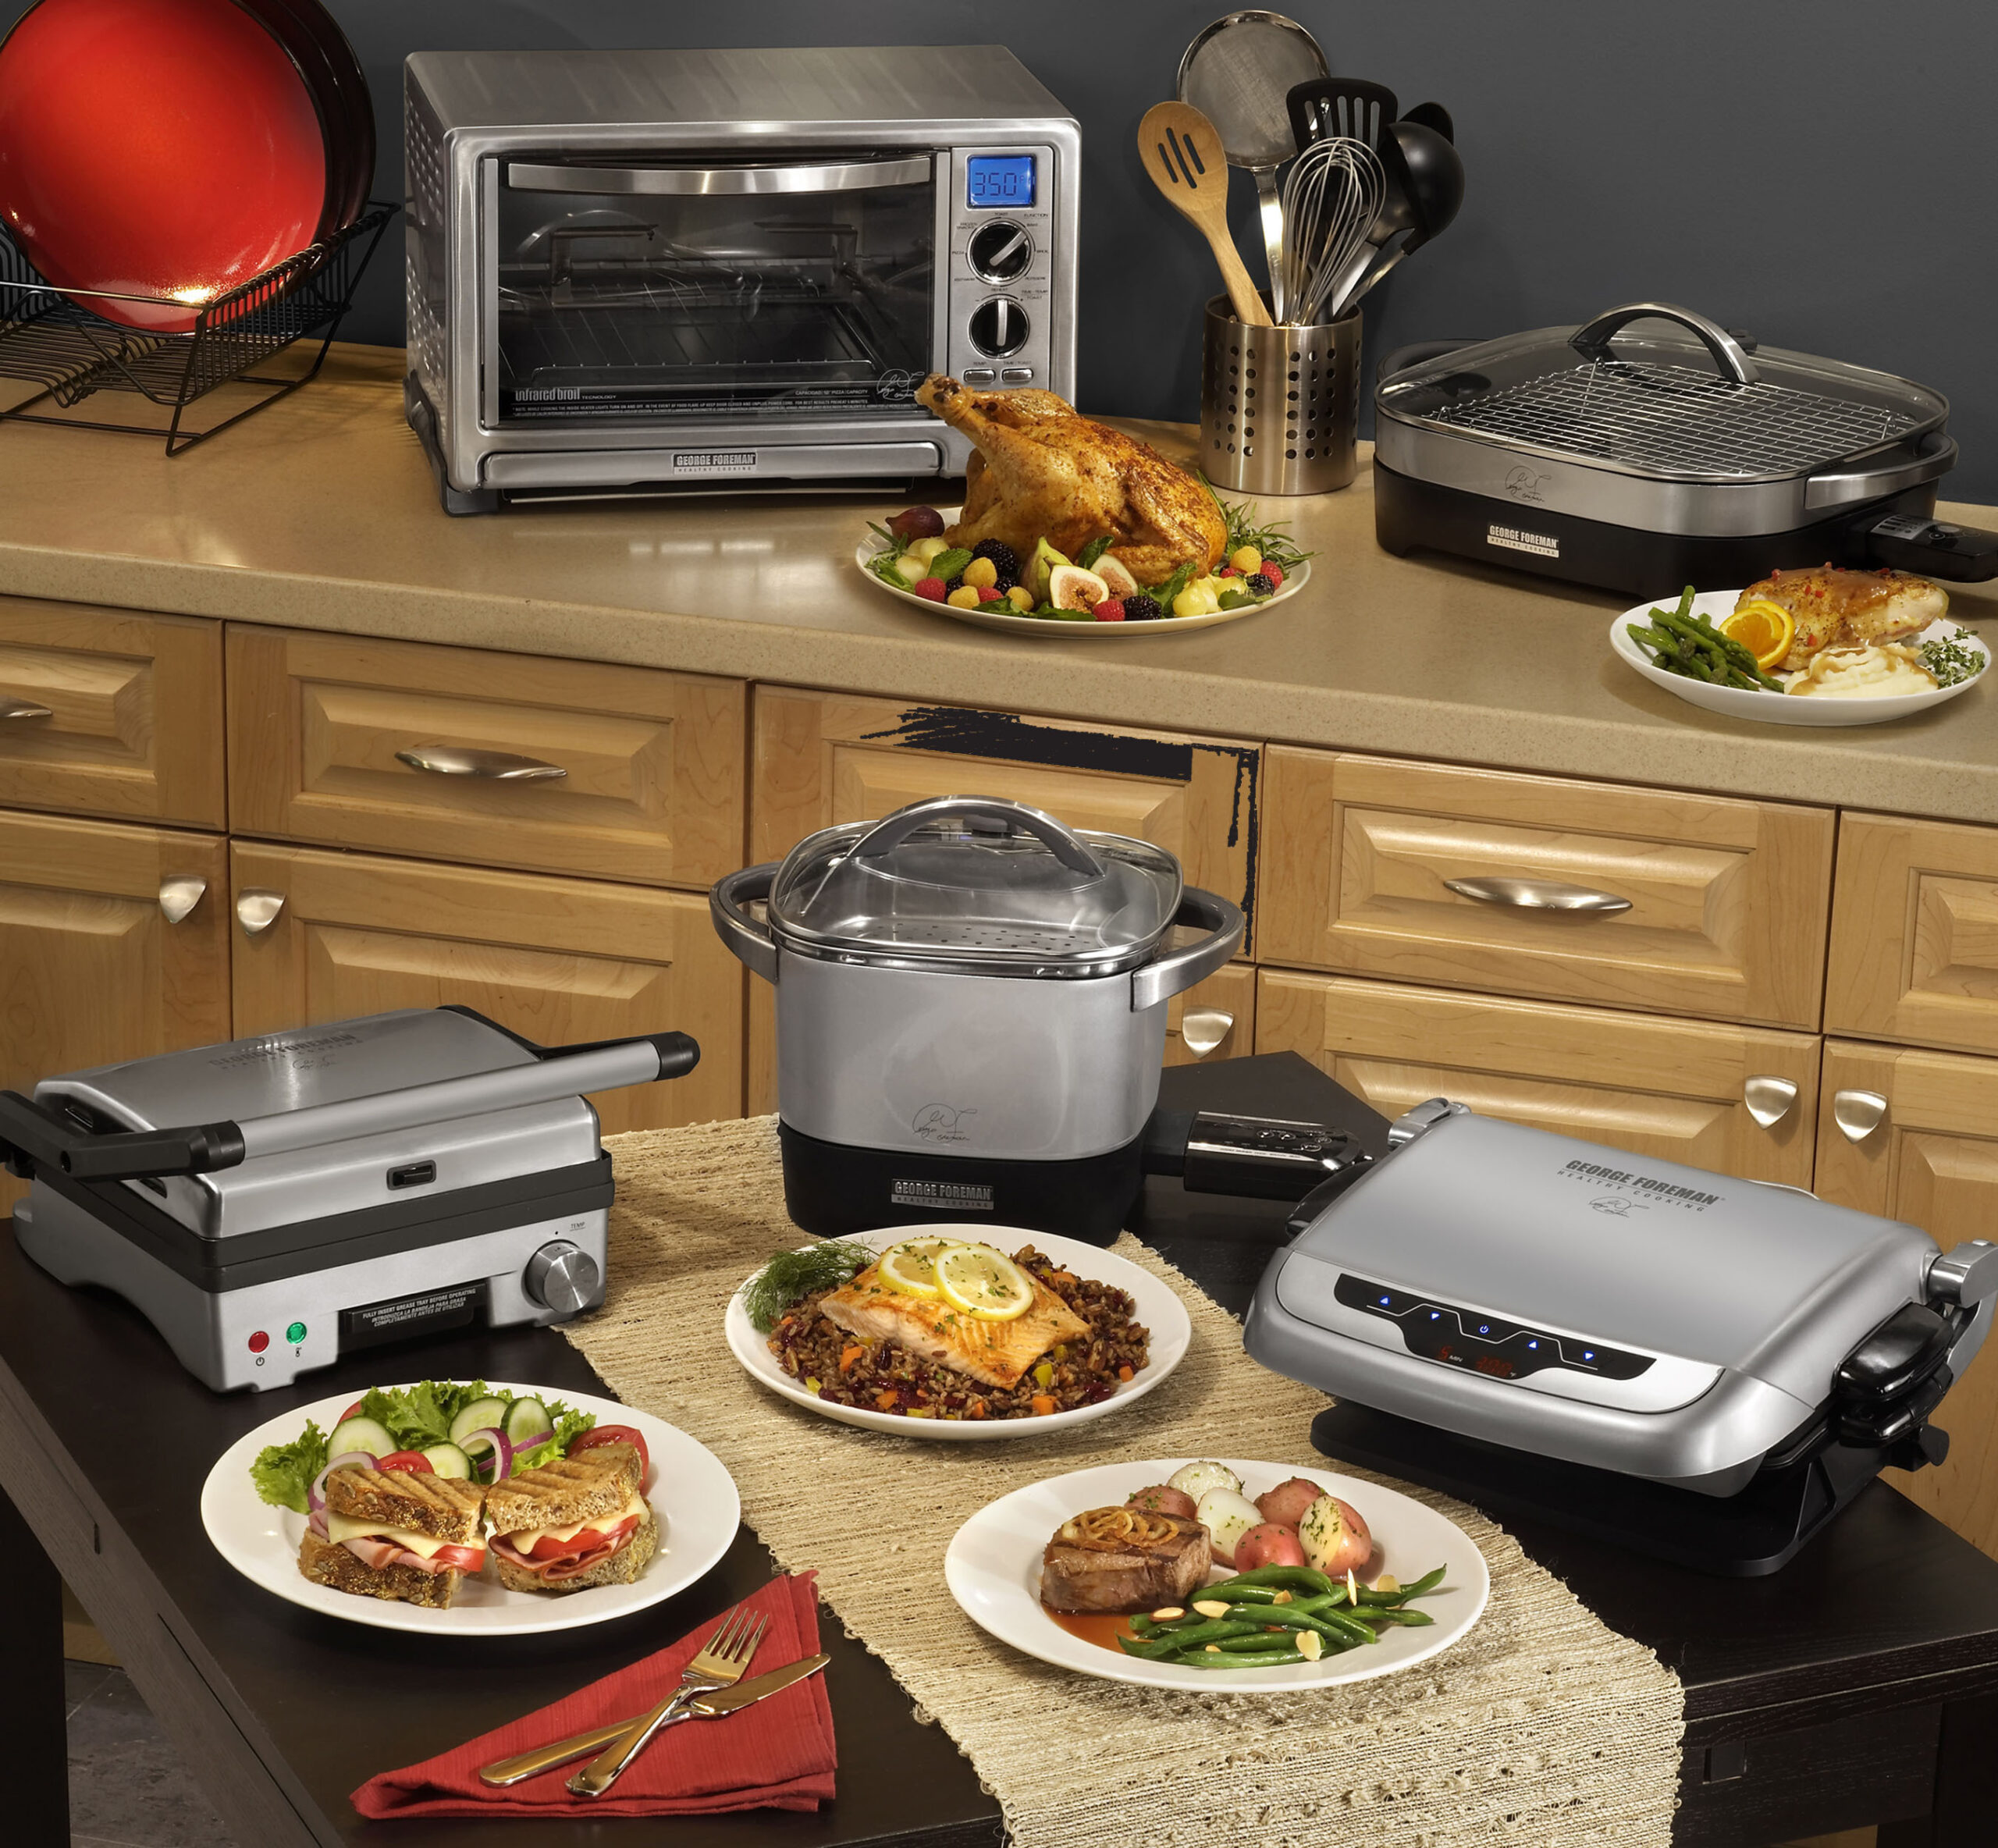 Transform Your Home Cooking Experience with Choice Home Warranty and George Foreman Grills